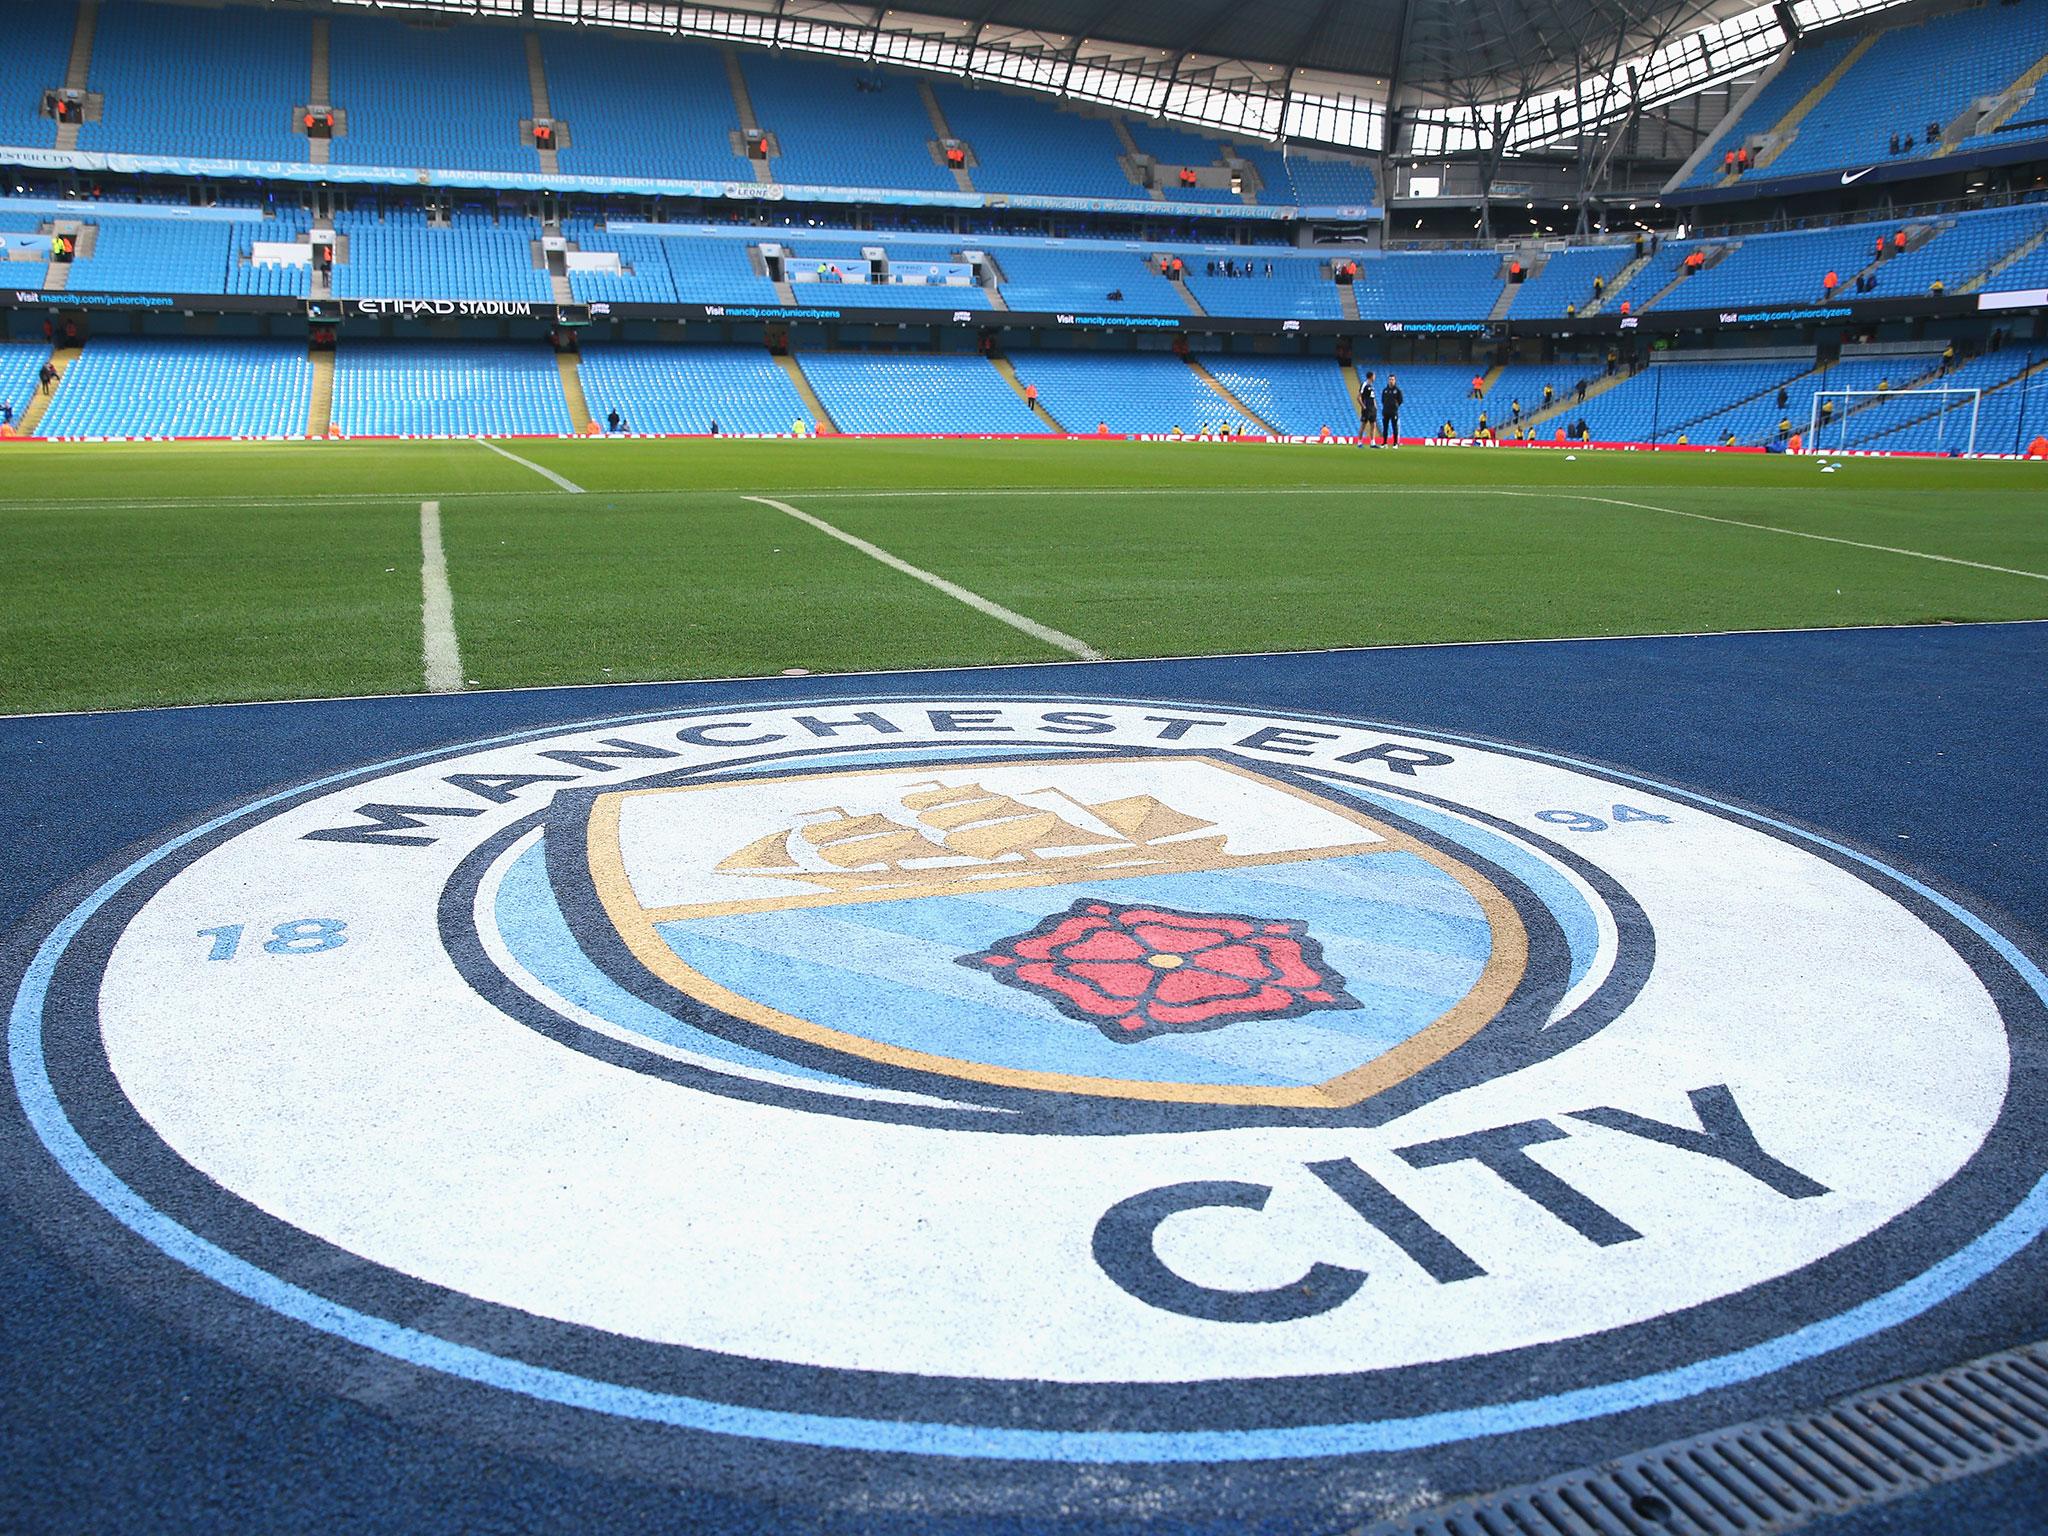 Manchester City were one of the teams fined last season